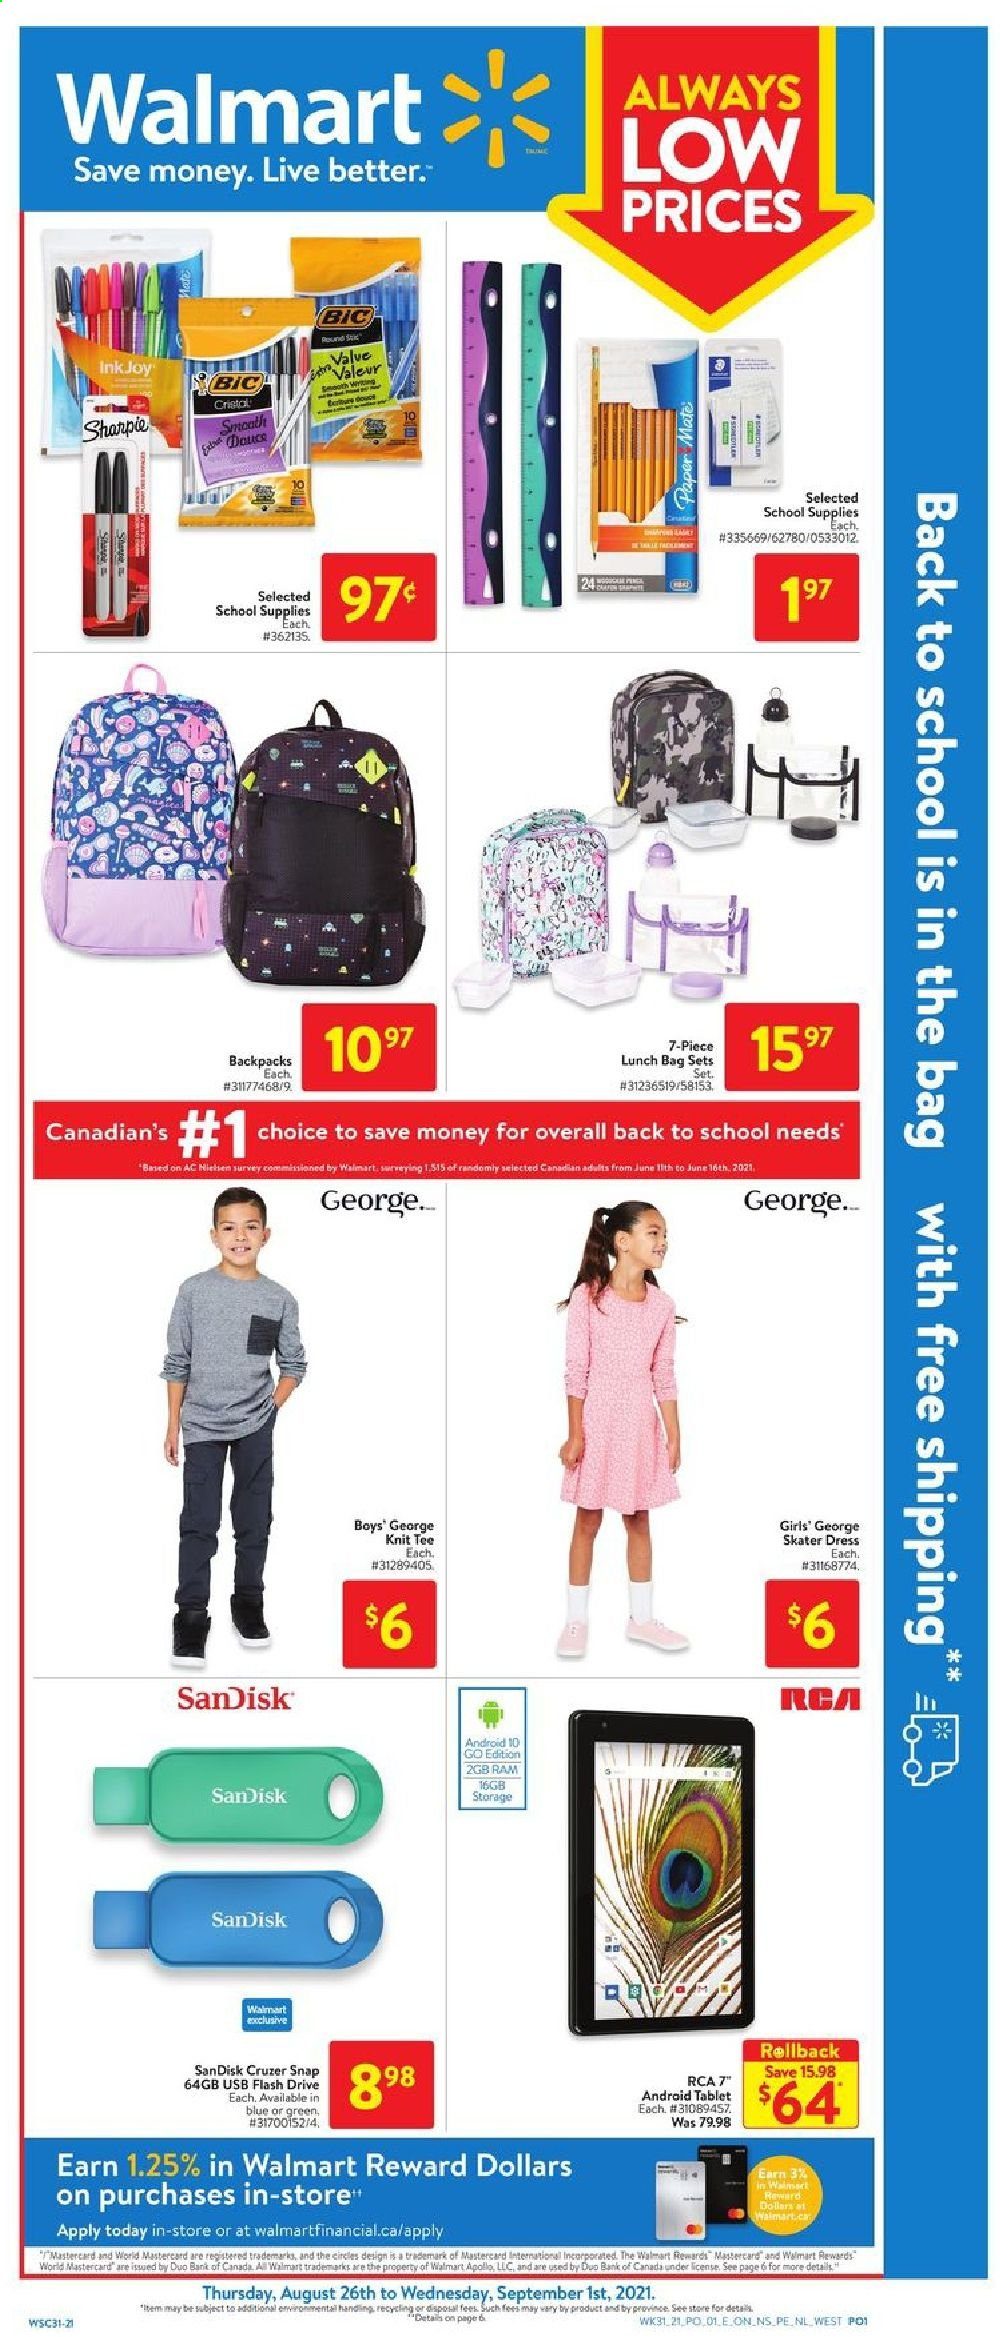 thumbnail - Walmart Flyer - August 26, 2021 - September 01, 2021 - Sales products - Sandisk, tablet, BIC, Sharpie, flash drive, RCA, dress. Page 1.